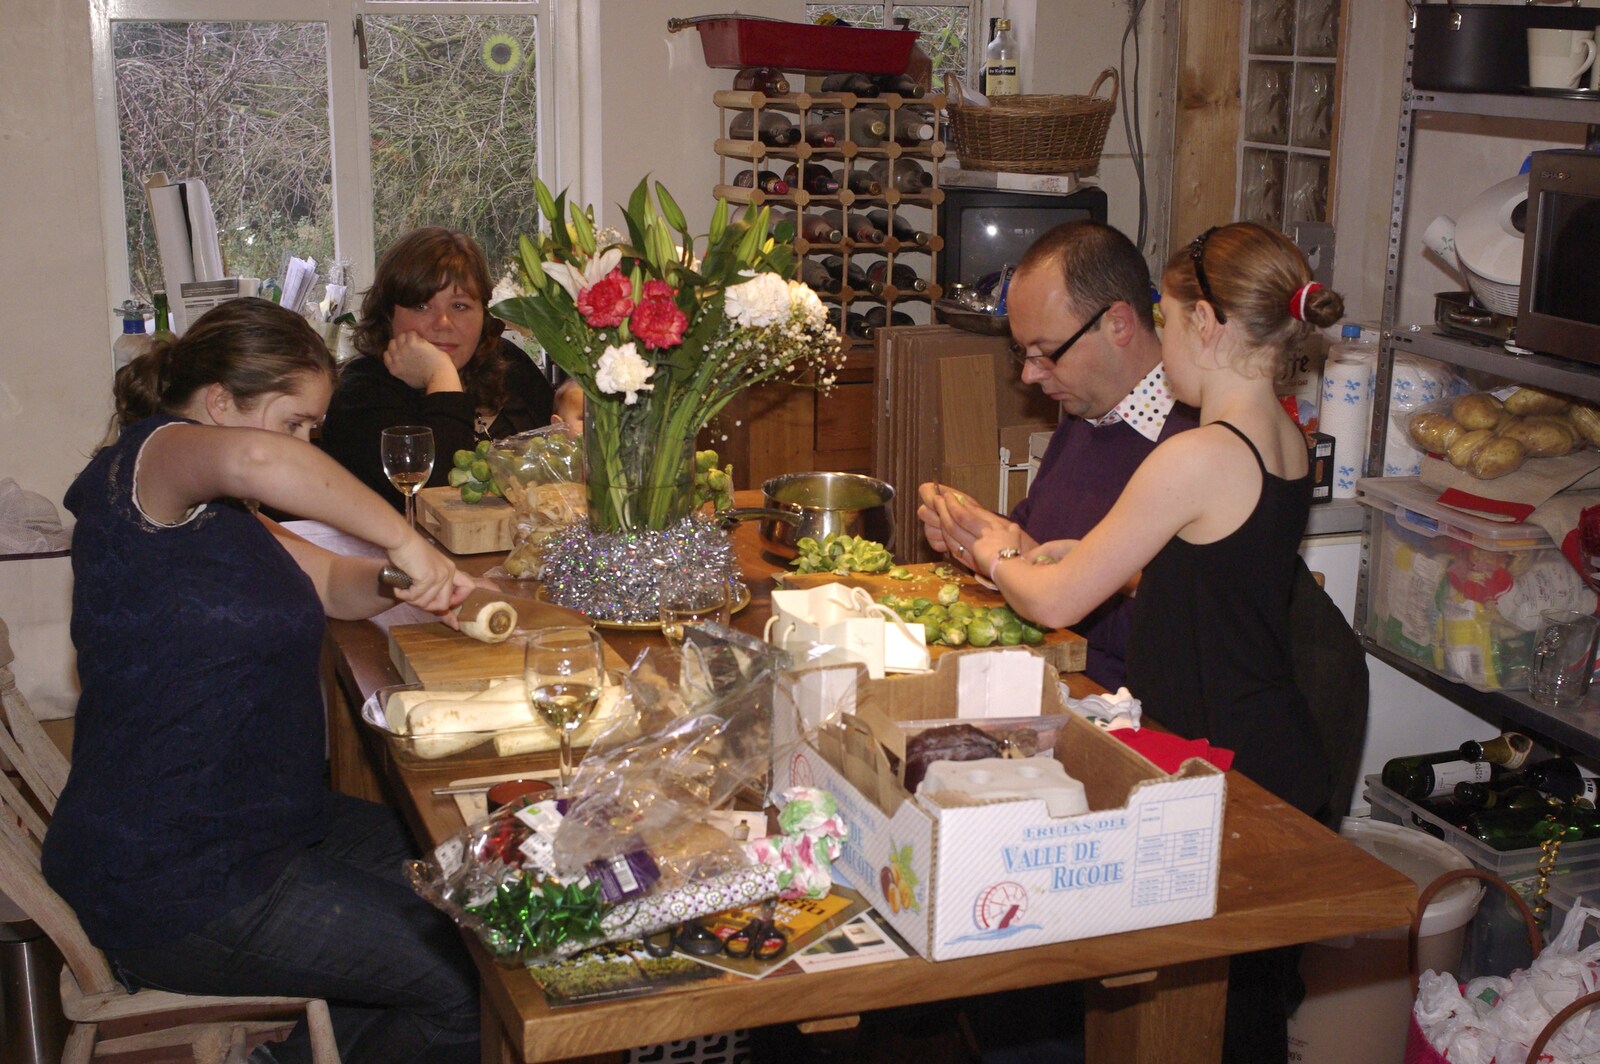 The veg team prepares for dinner from Fred's First Christmas, Brome, Suffolk - 25th December 2008